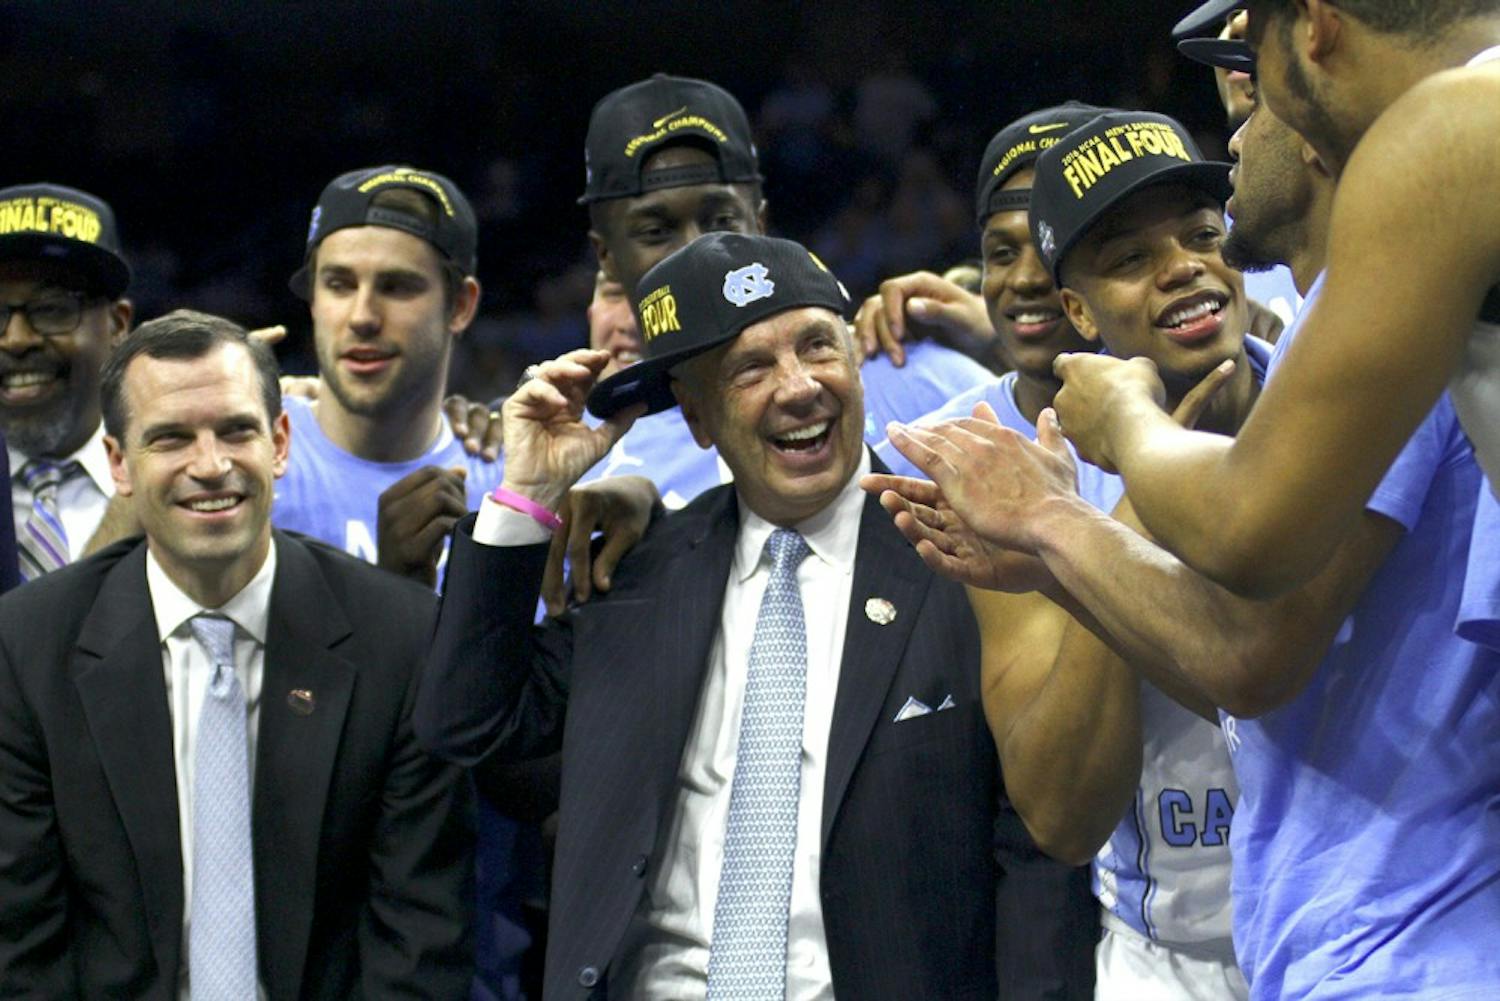 North Carolina men's basketball head coach Roy Williams celebrates with his team after winning a spot in the Final Four.&nbsp;